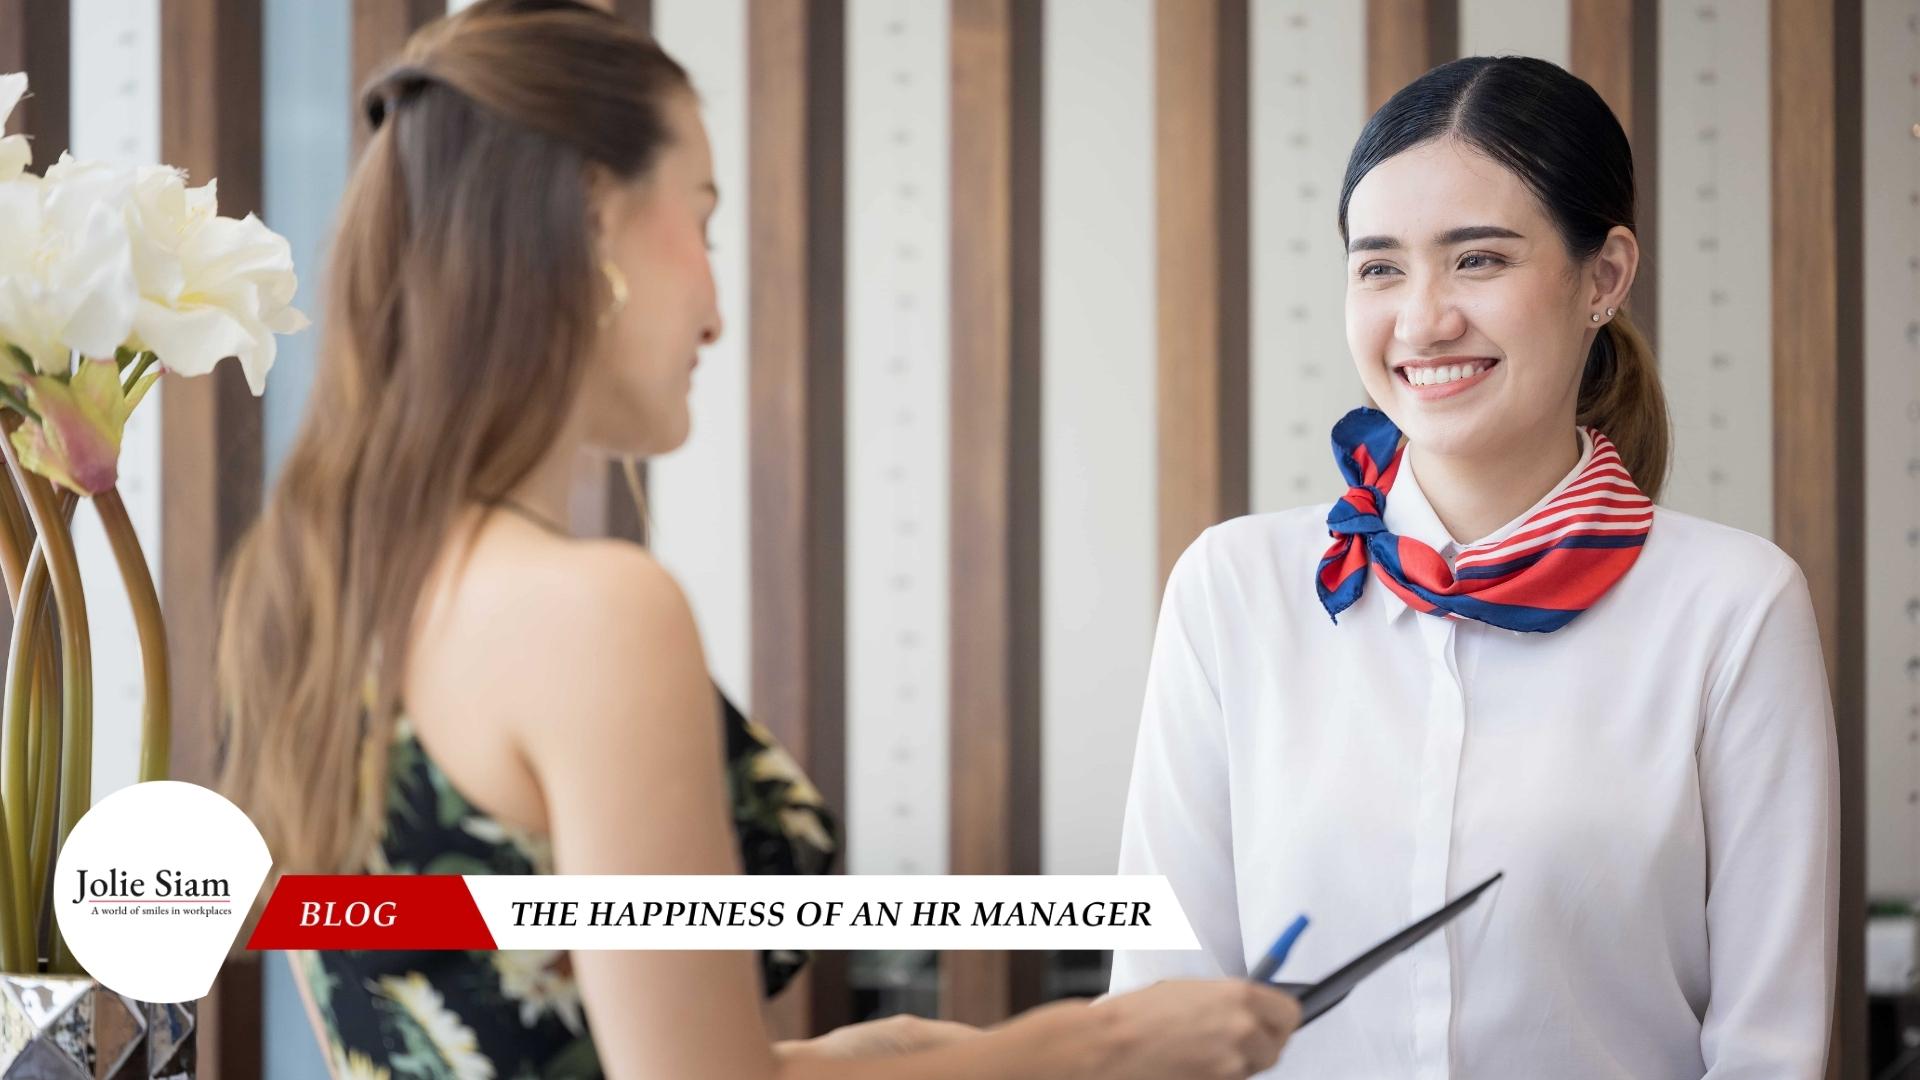 The happiness of HR managerment